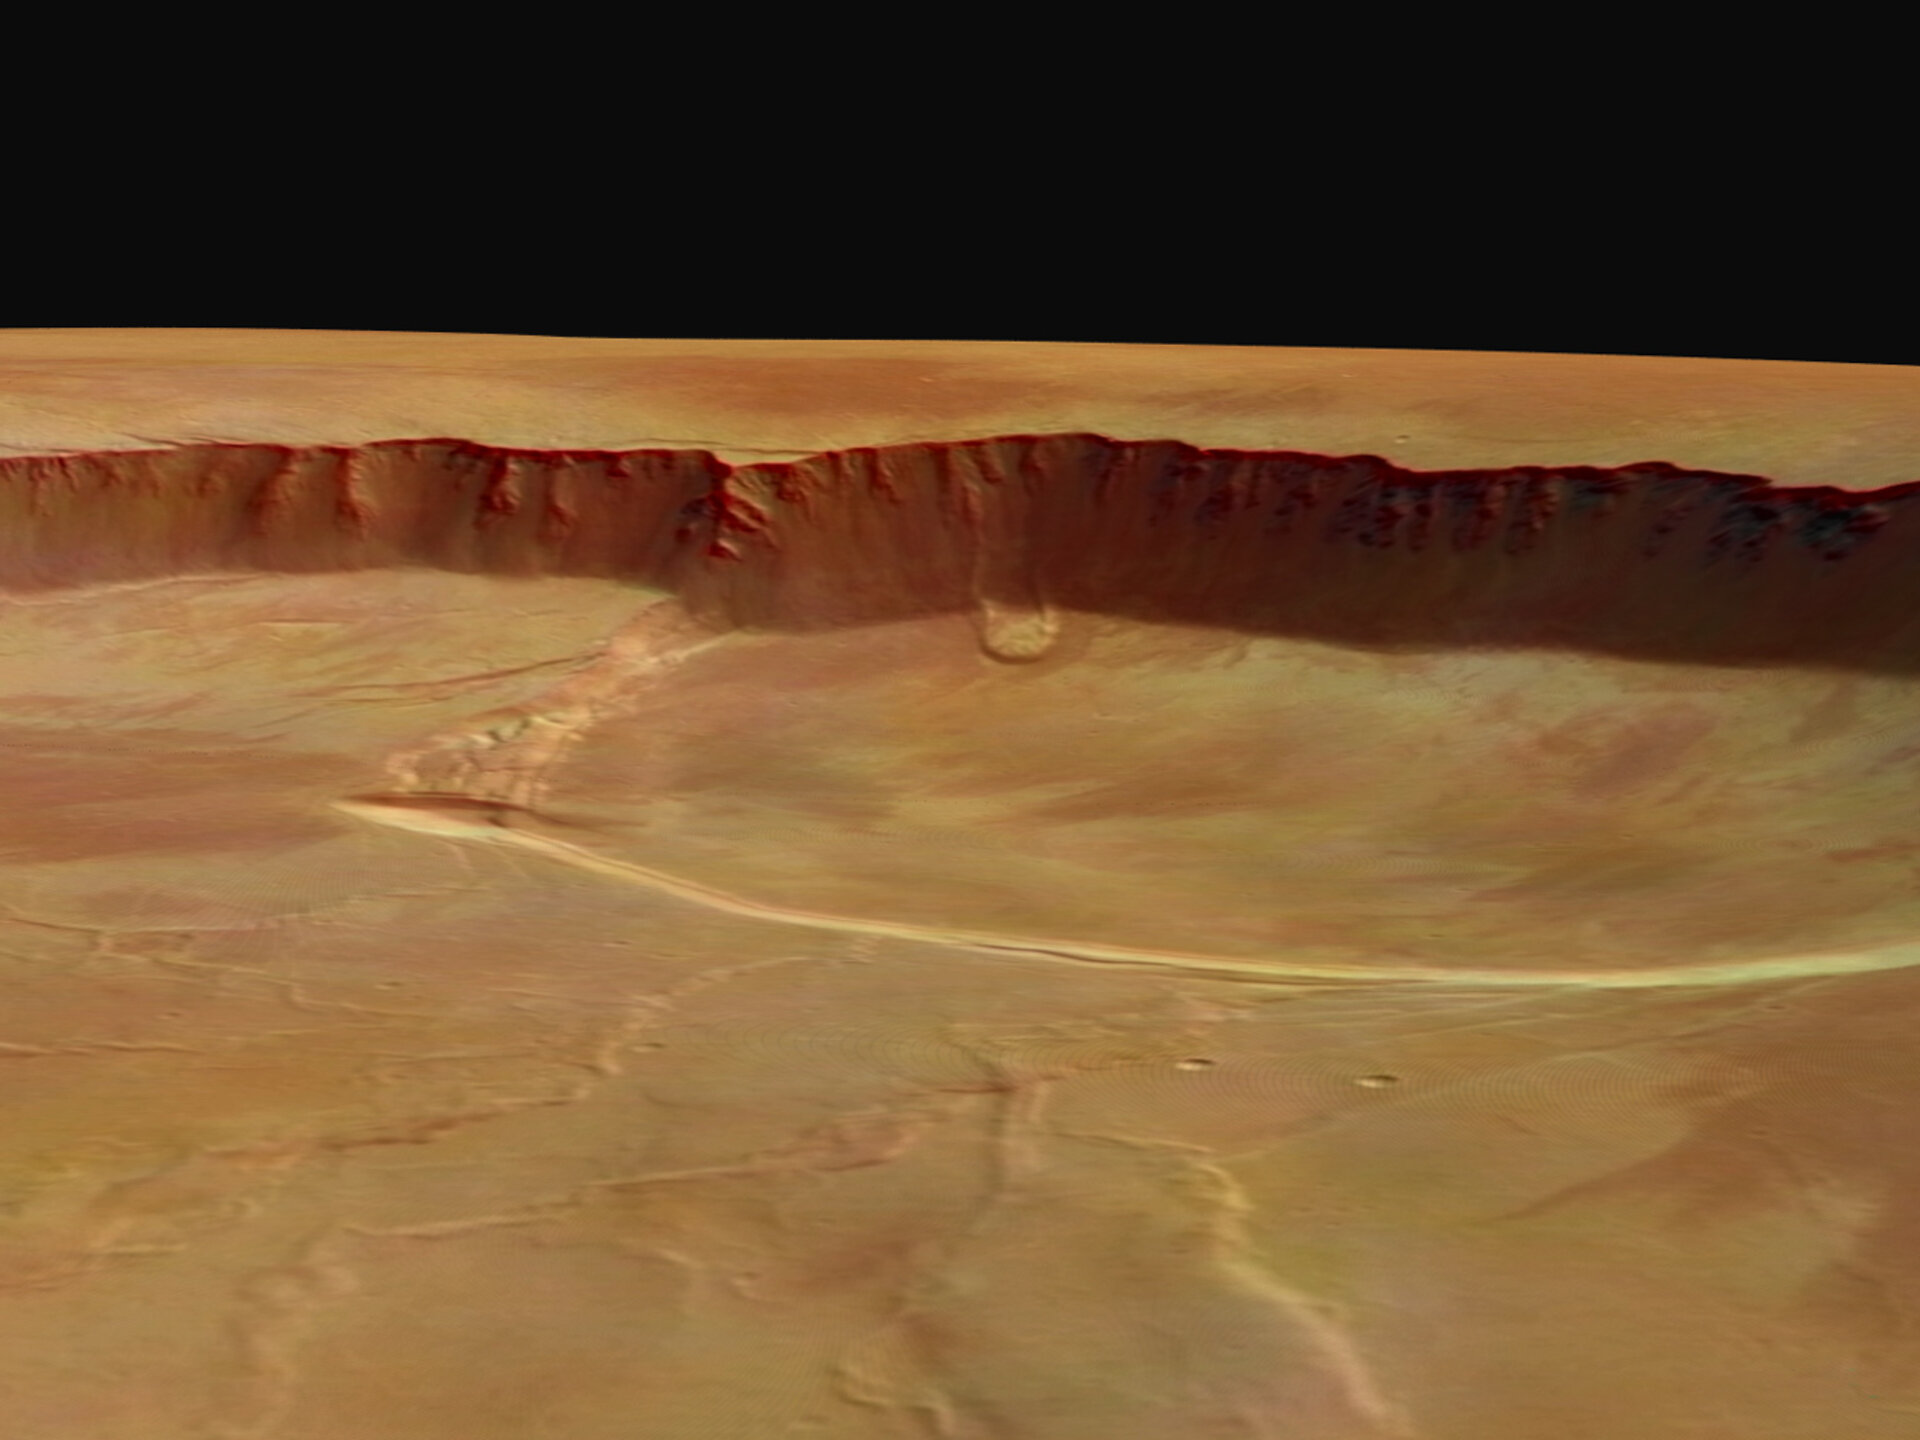 Southern part of the Olympus Mons caldera &#8211; perspective view